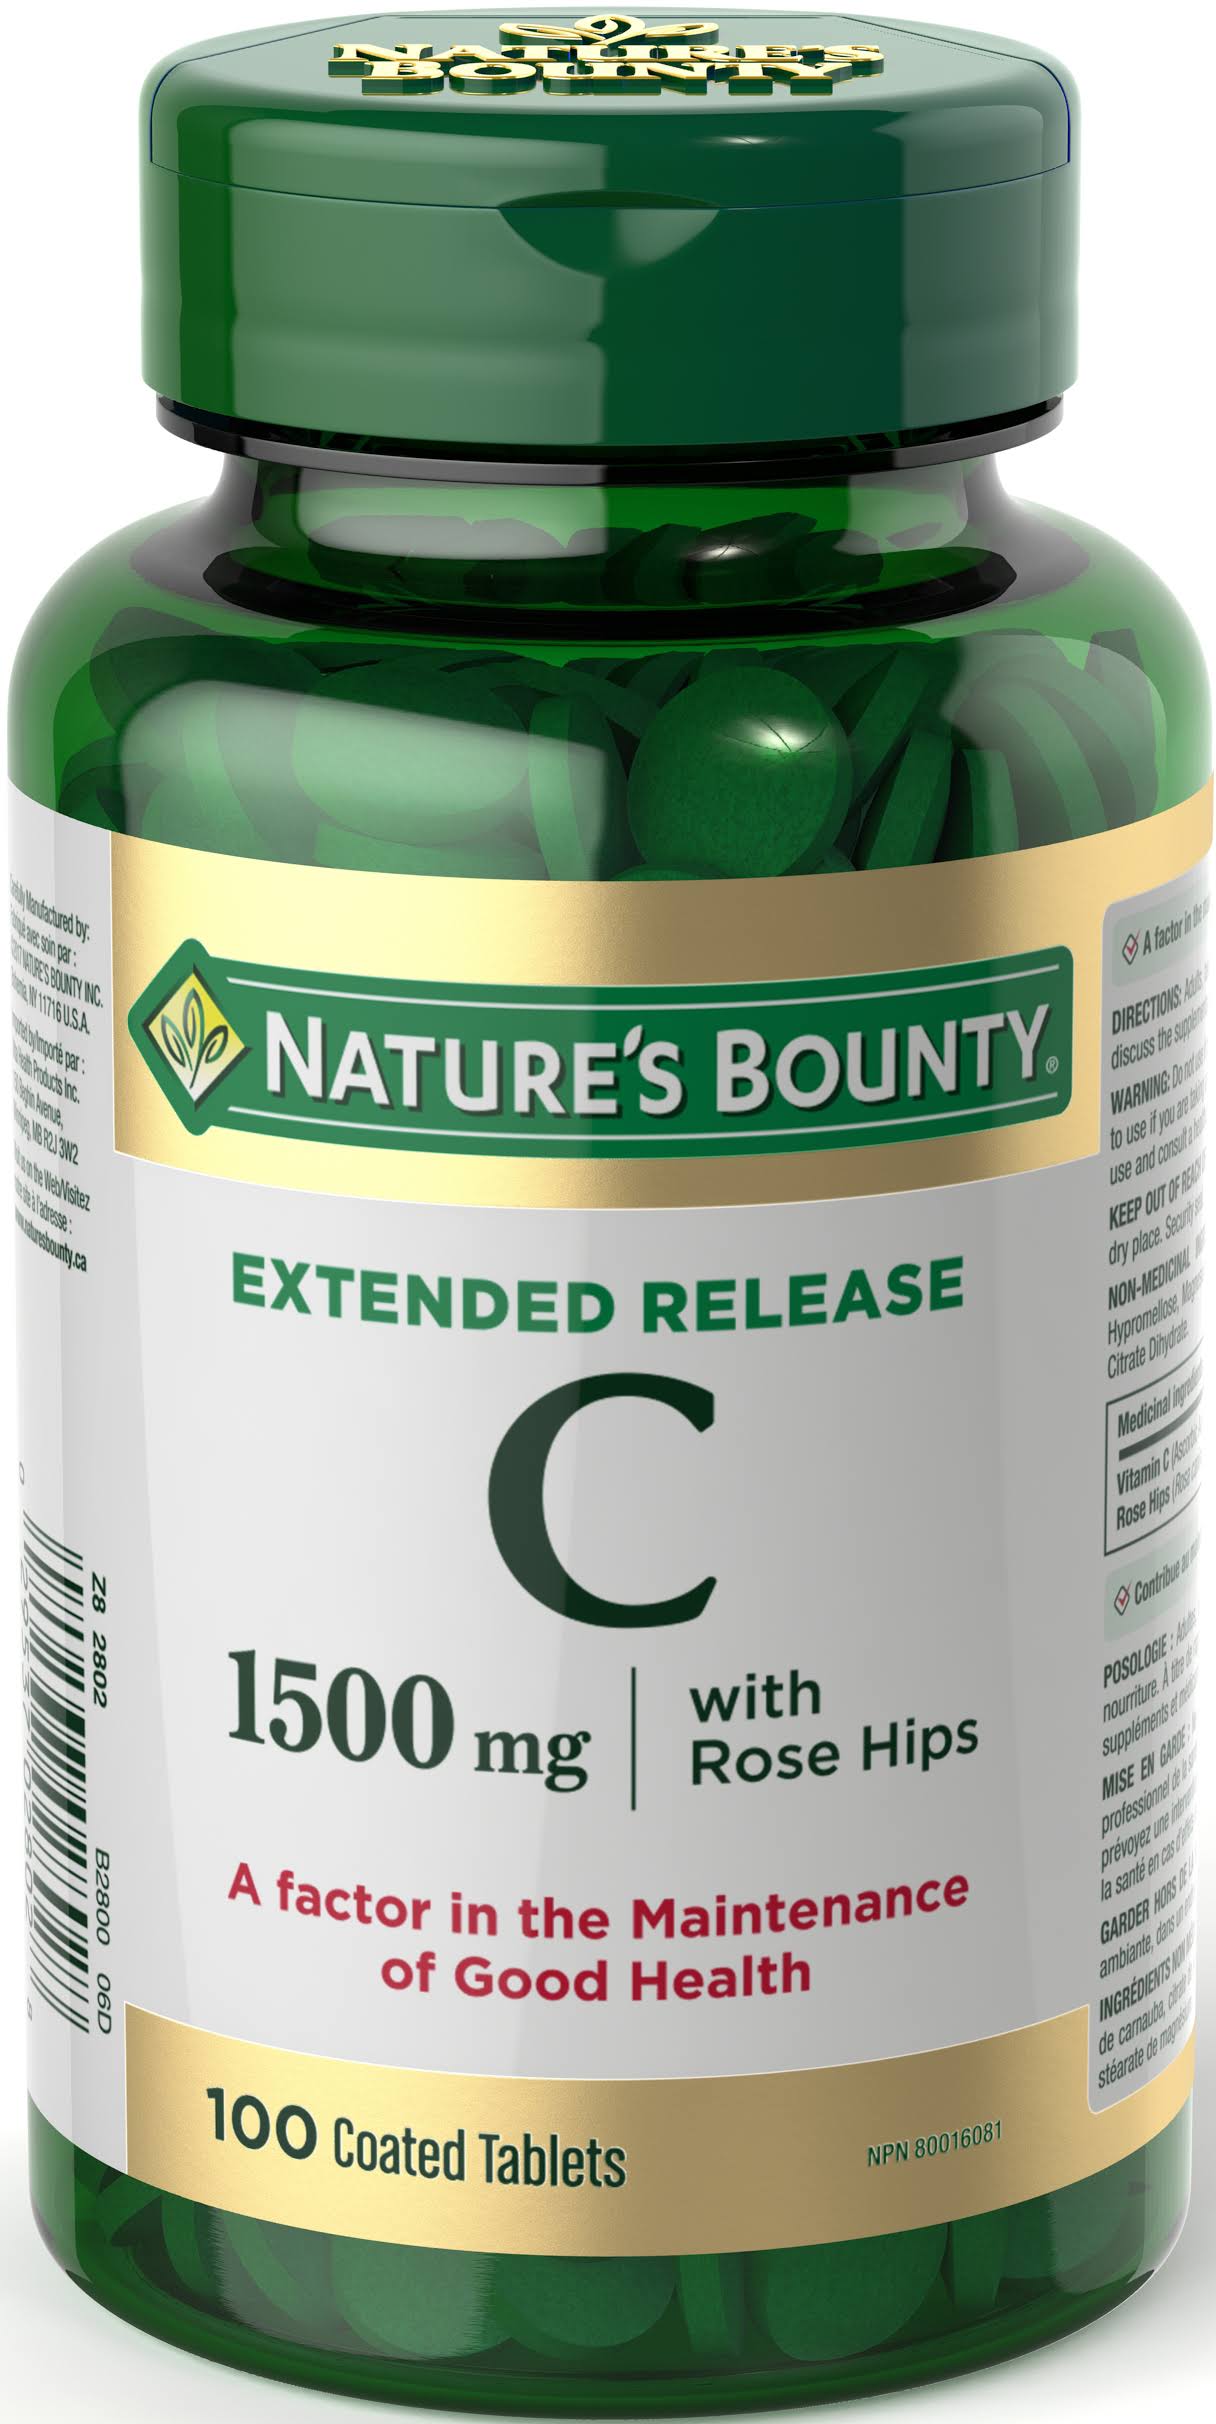 Nature's Bounty Extended Release Vitamin C-1500 Supplement - With Rose Hips, 100 Coated Tablets